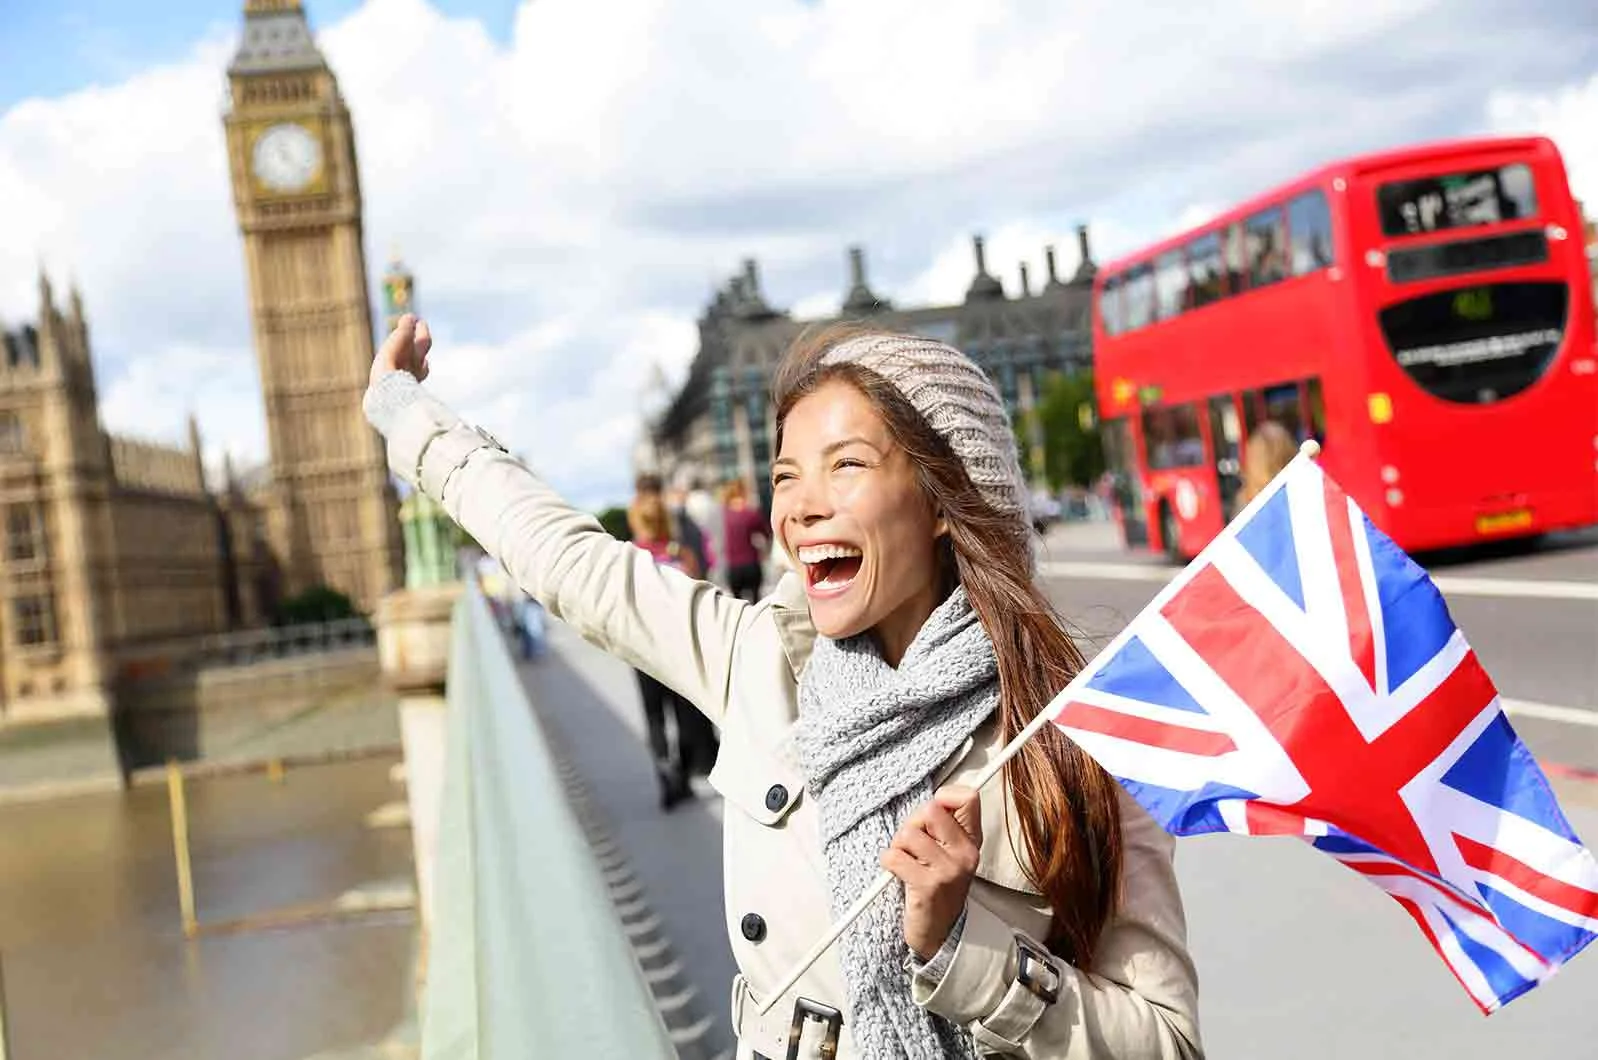 Asian woman standing in front of Big Ben, holding the United Kingdom's flag. Concept of translating languages.